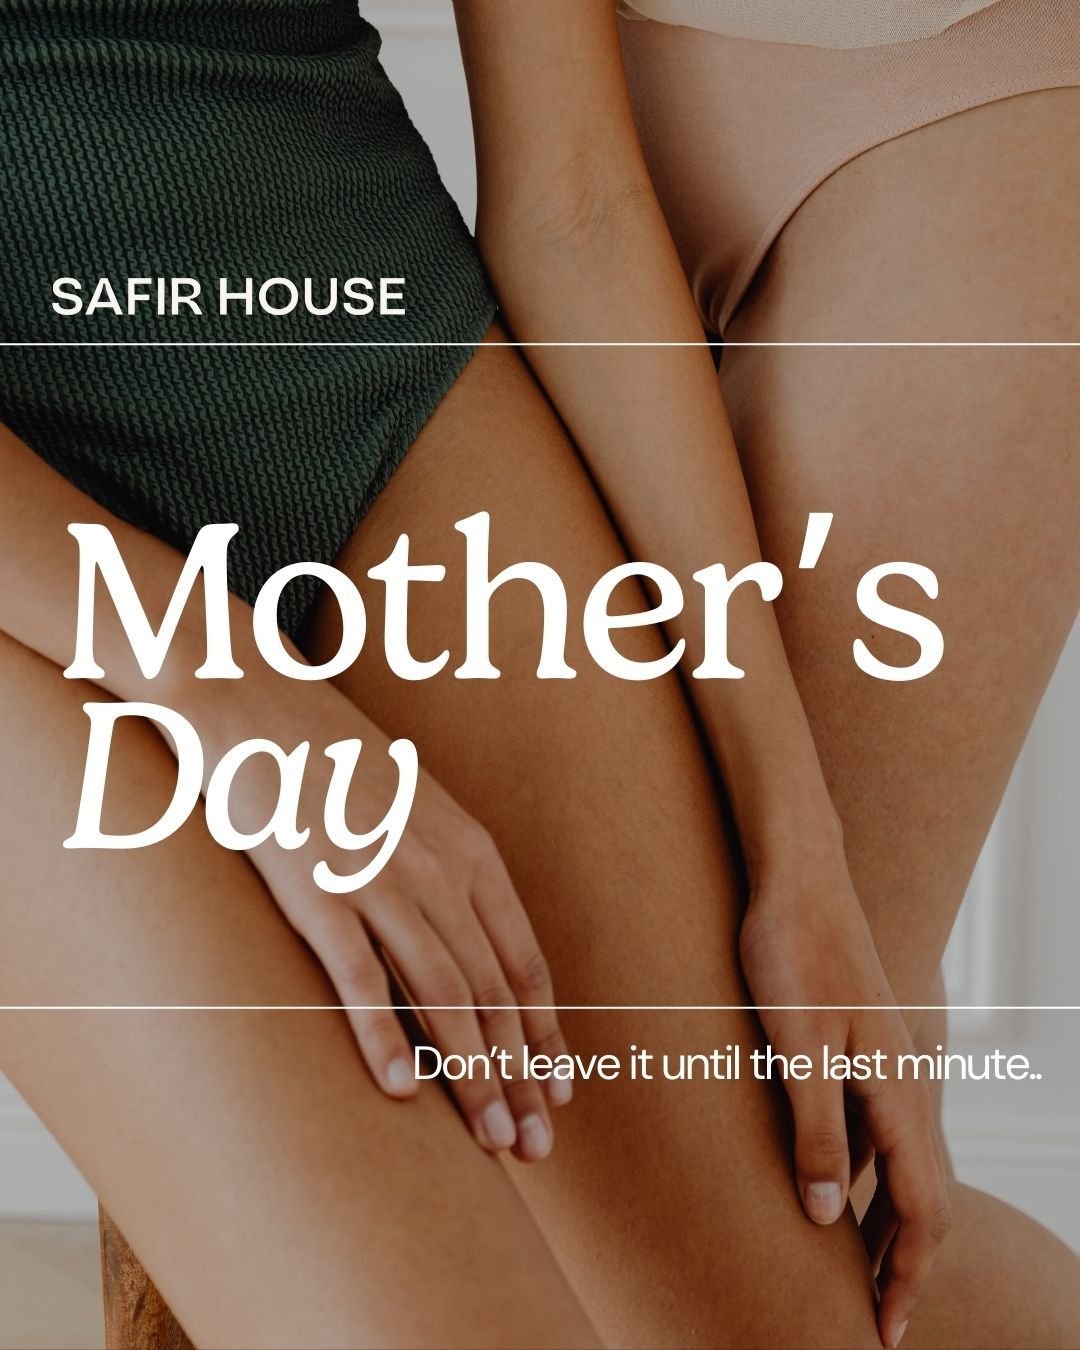 With less than a week until Mother's Day, we've saved you the guess work and have compiled a gifting guide, so you can give her a gift she truely deserves (and wants). 

- Treat her to a lymphatic massage - promoting detoxification, reducing swelling